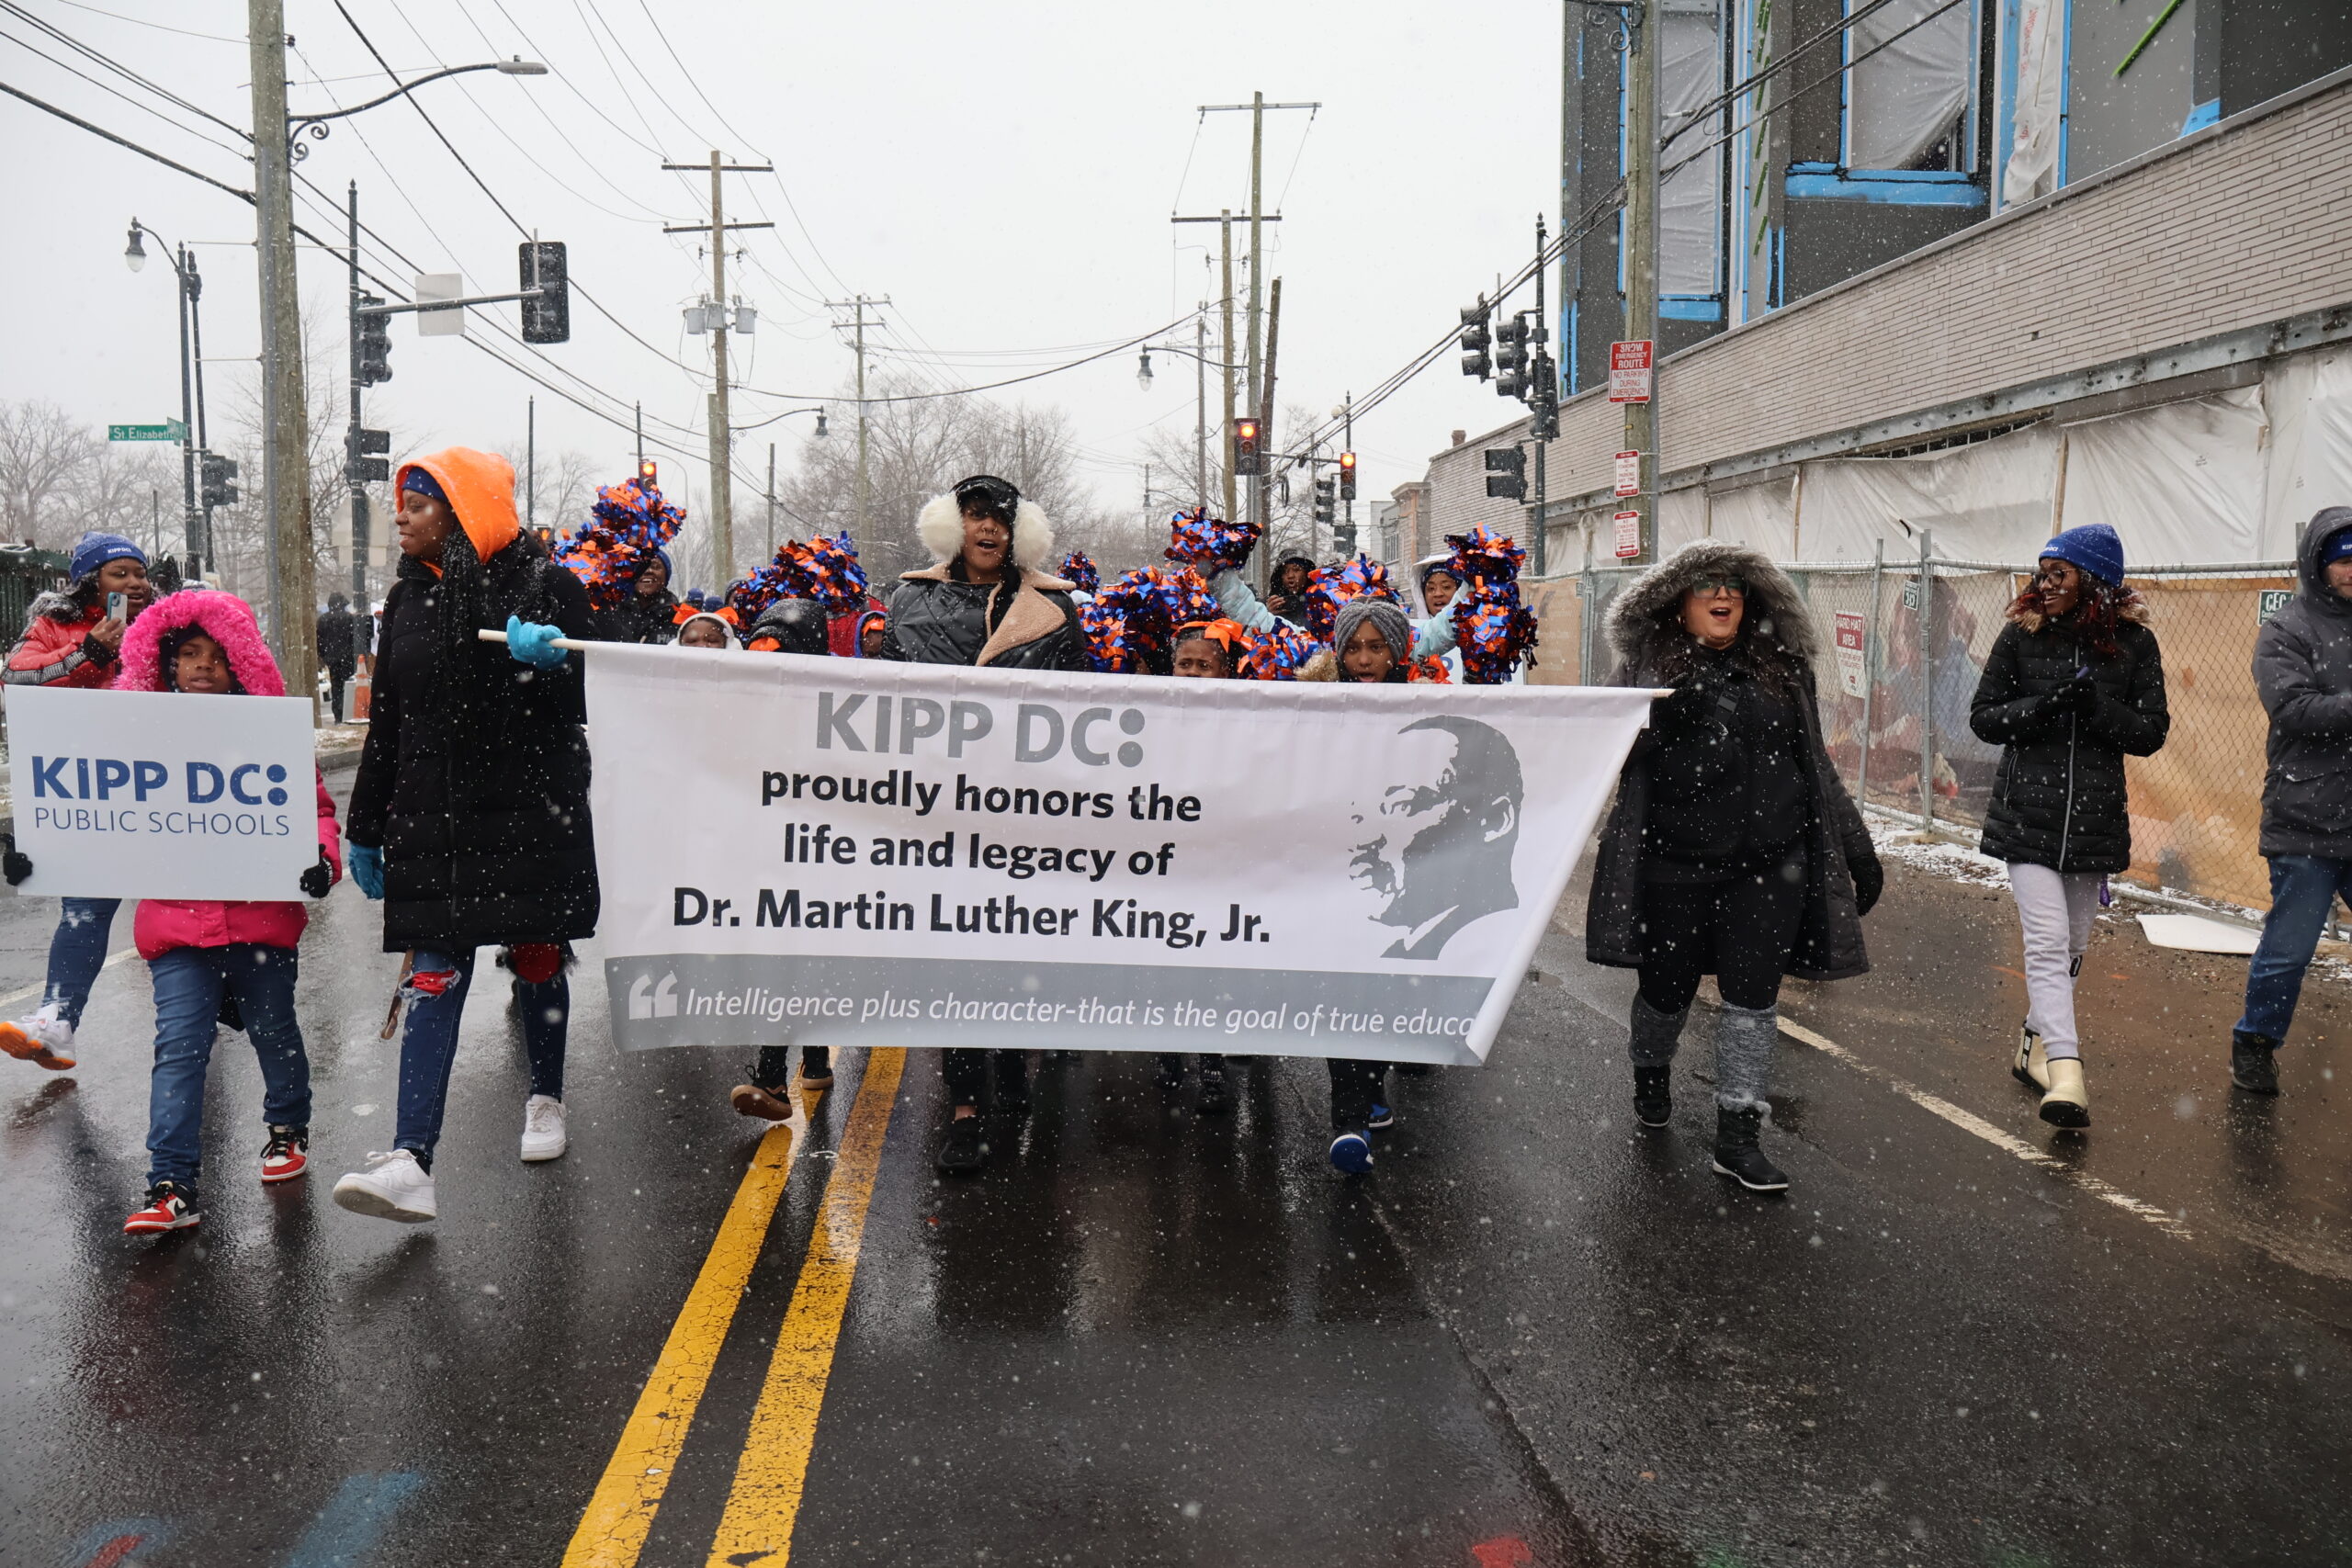 KIPP DC marching in the MLK parade